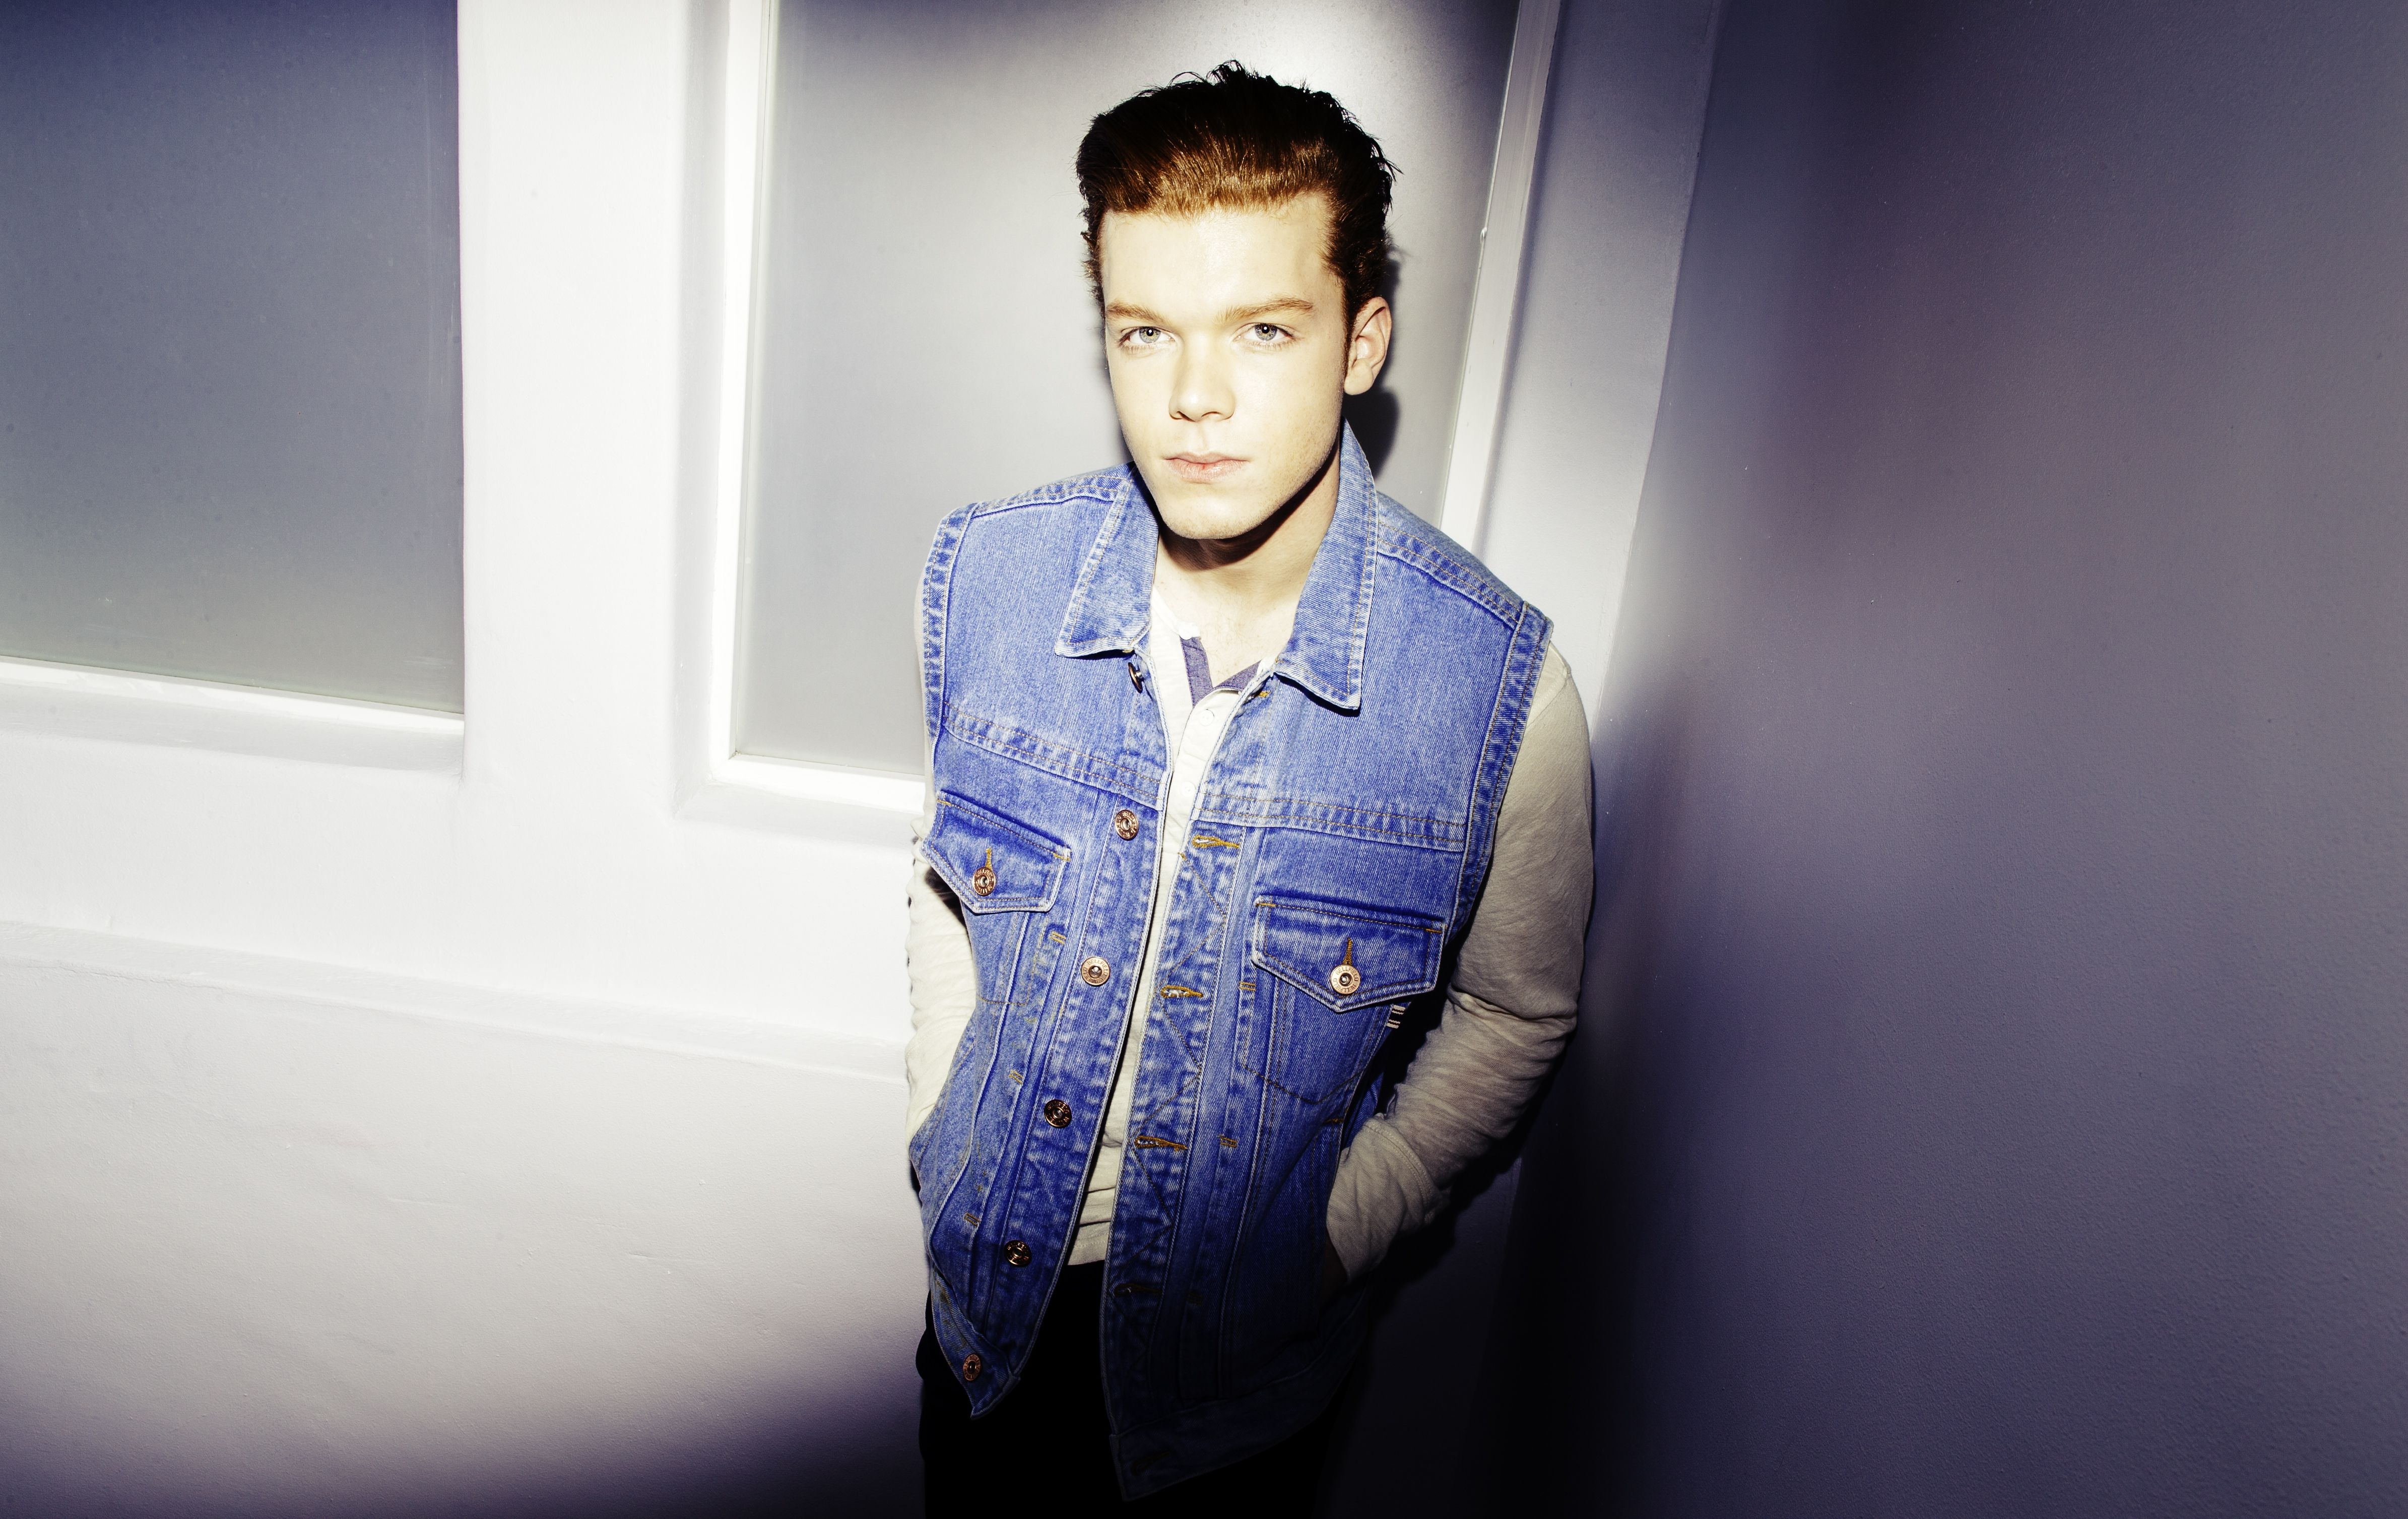 Cameron Monaghan Wallpaper Image Photo Picture Background